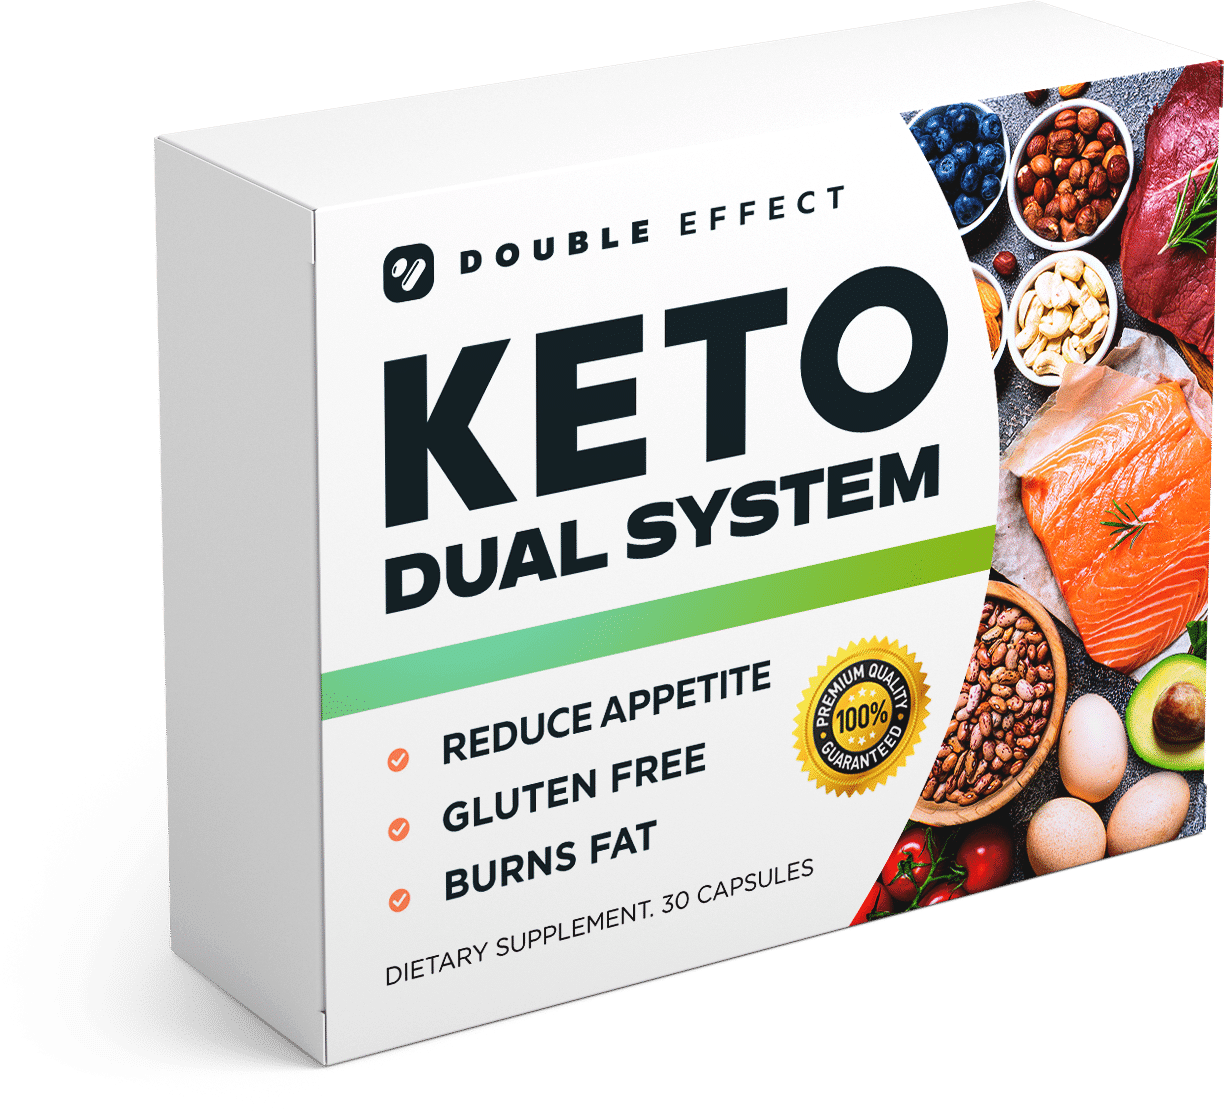 Keto Dual System What is it?